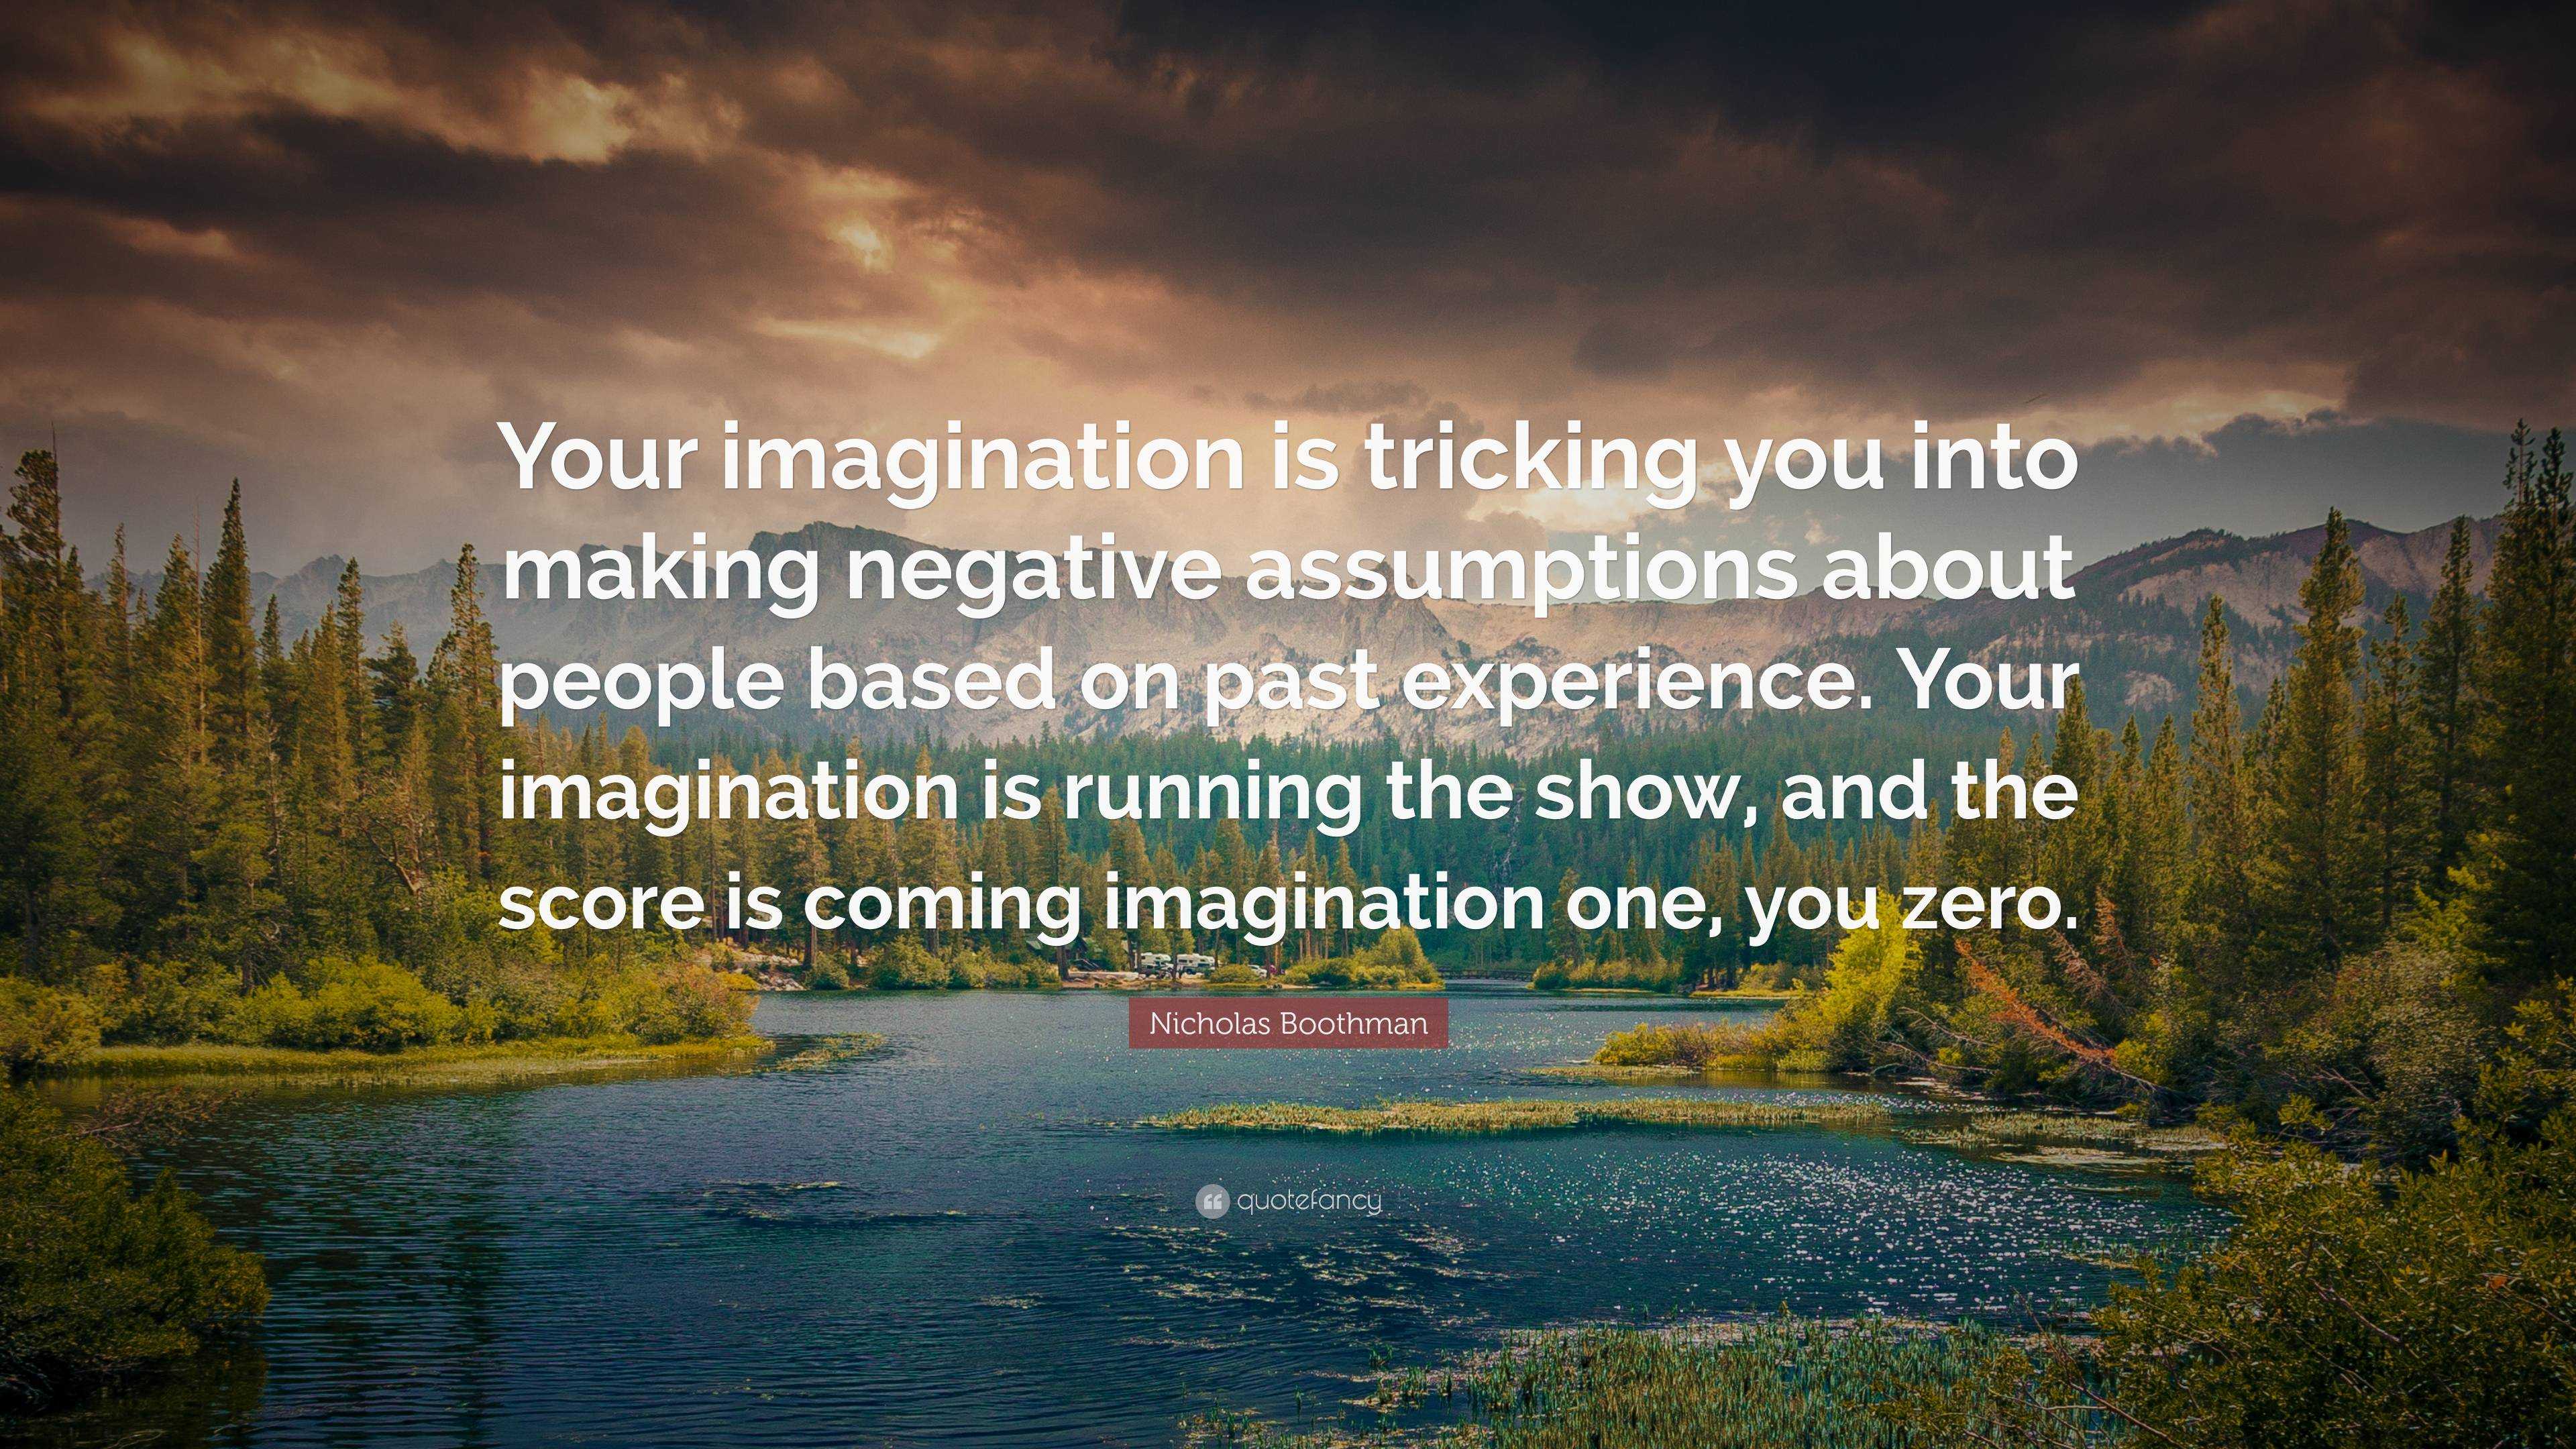 Nicholas Boothman Quote: “Your imagination is tricking you into making ...